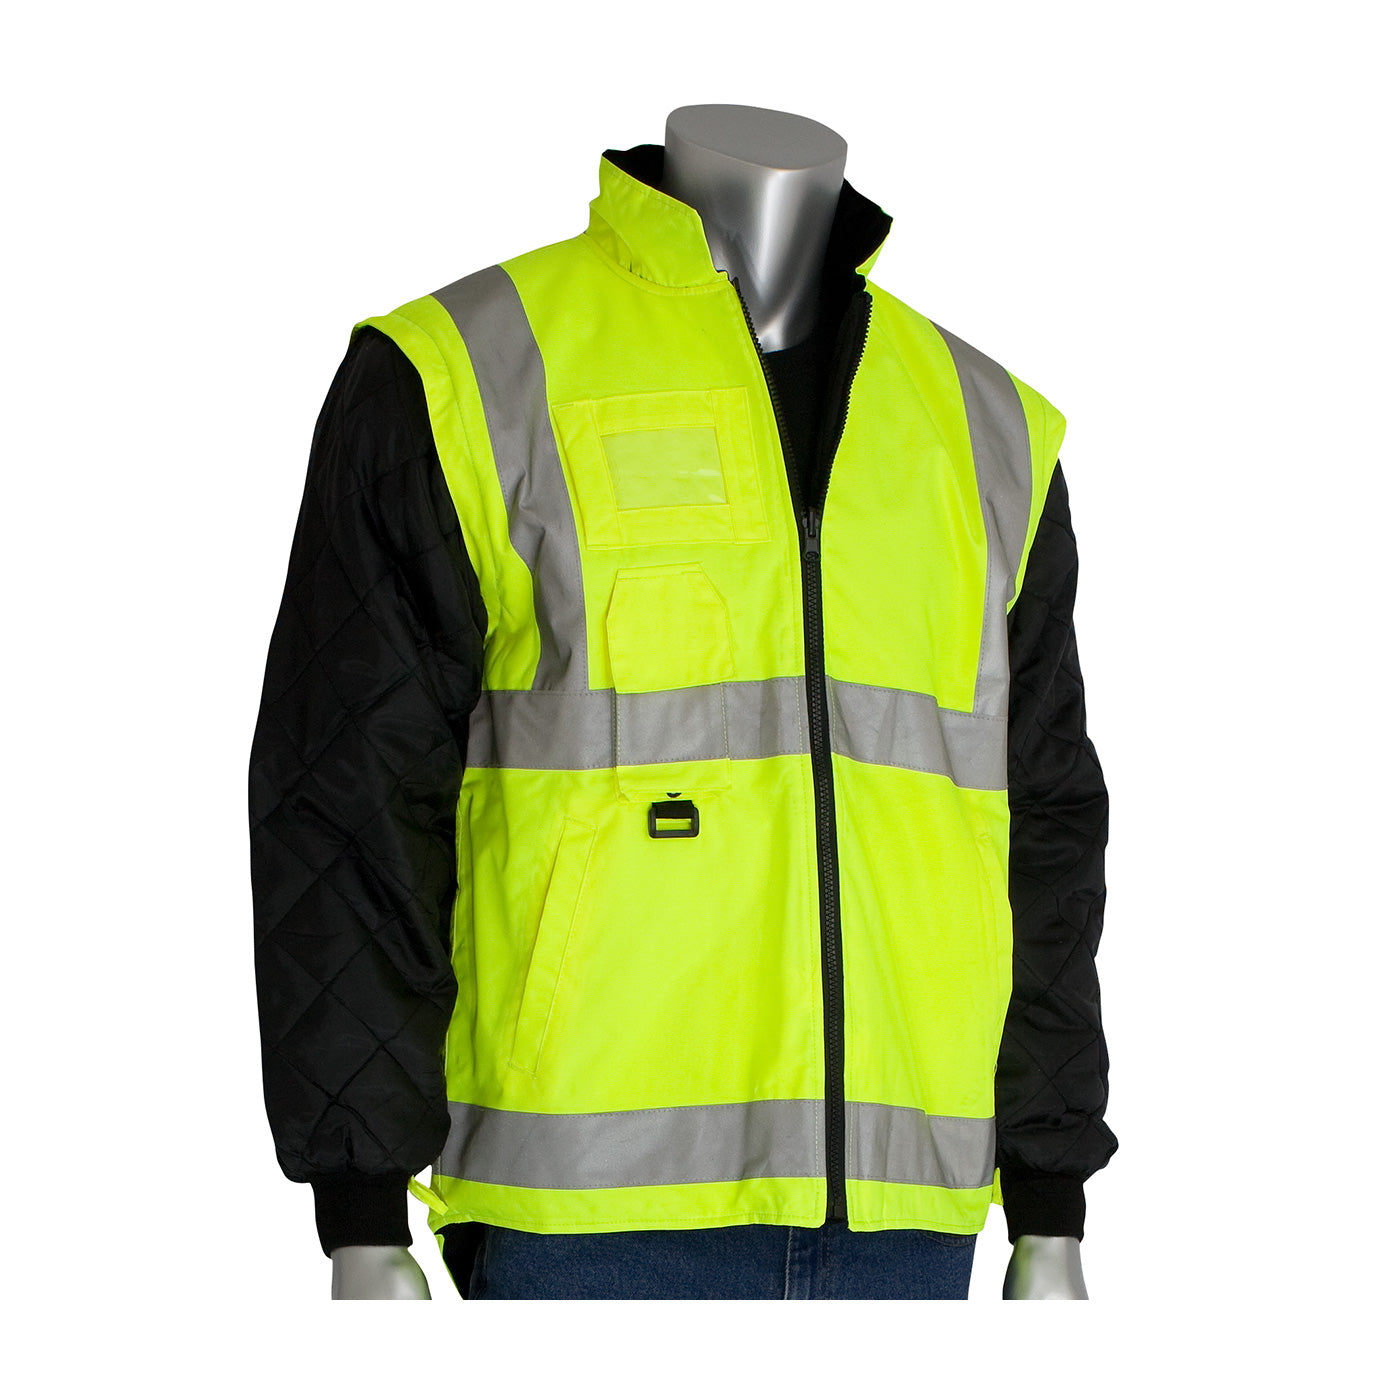 PIP 343-1756-YEL/L ANSI Type R Class 3 7-in-1 All Conditions Coat with Inner Jacket and Vest Combination